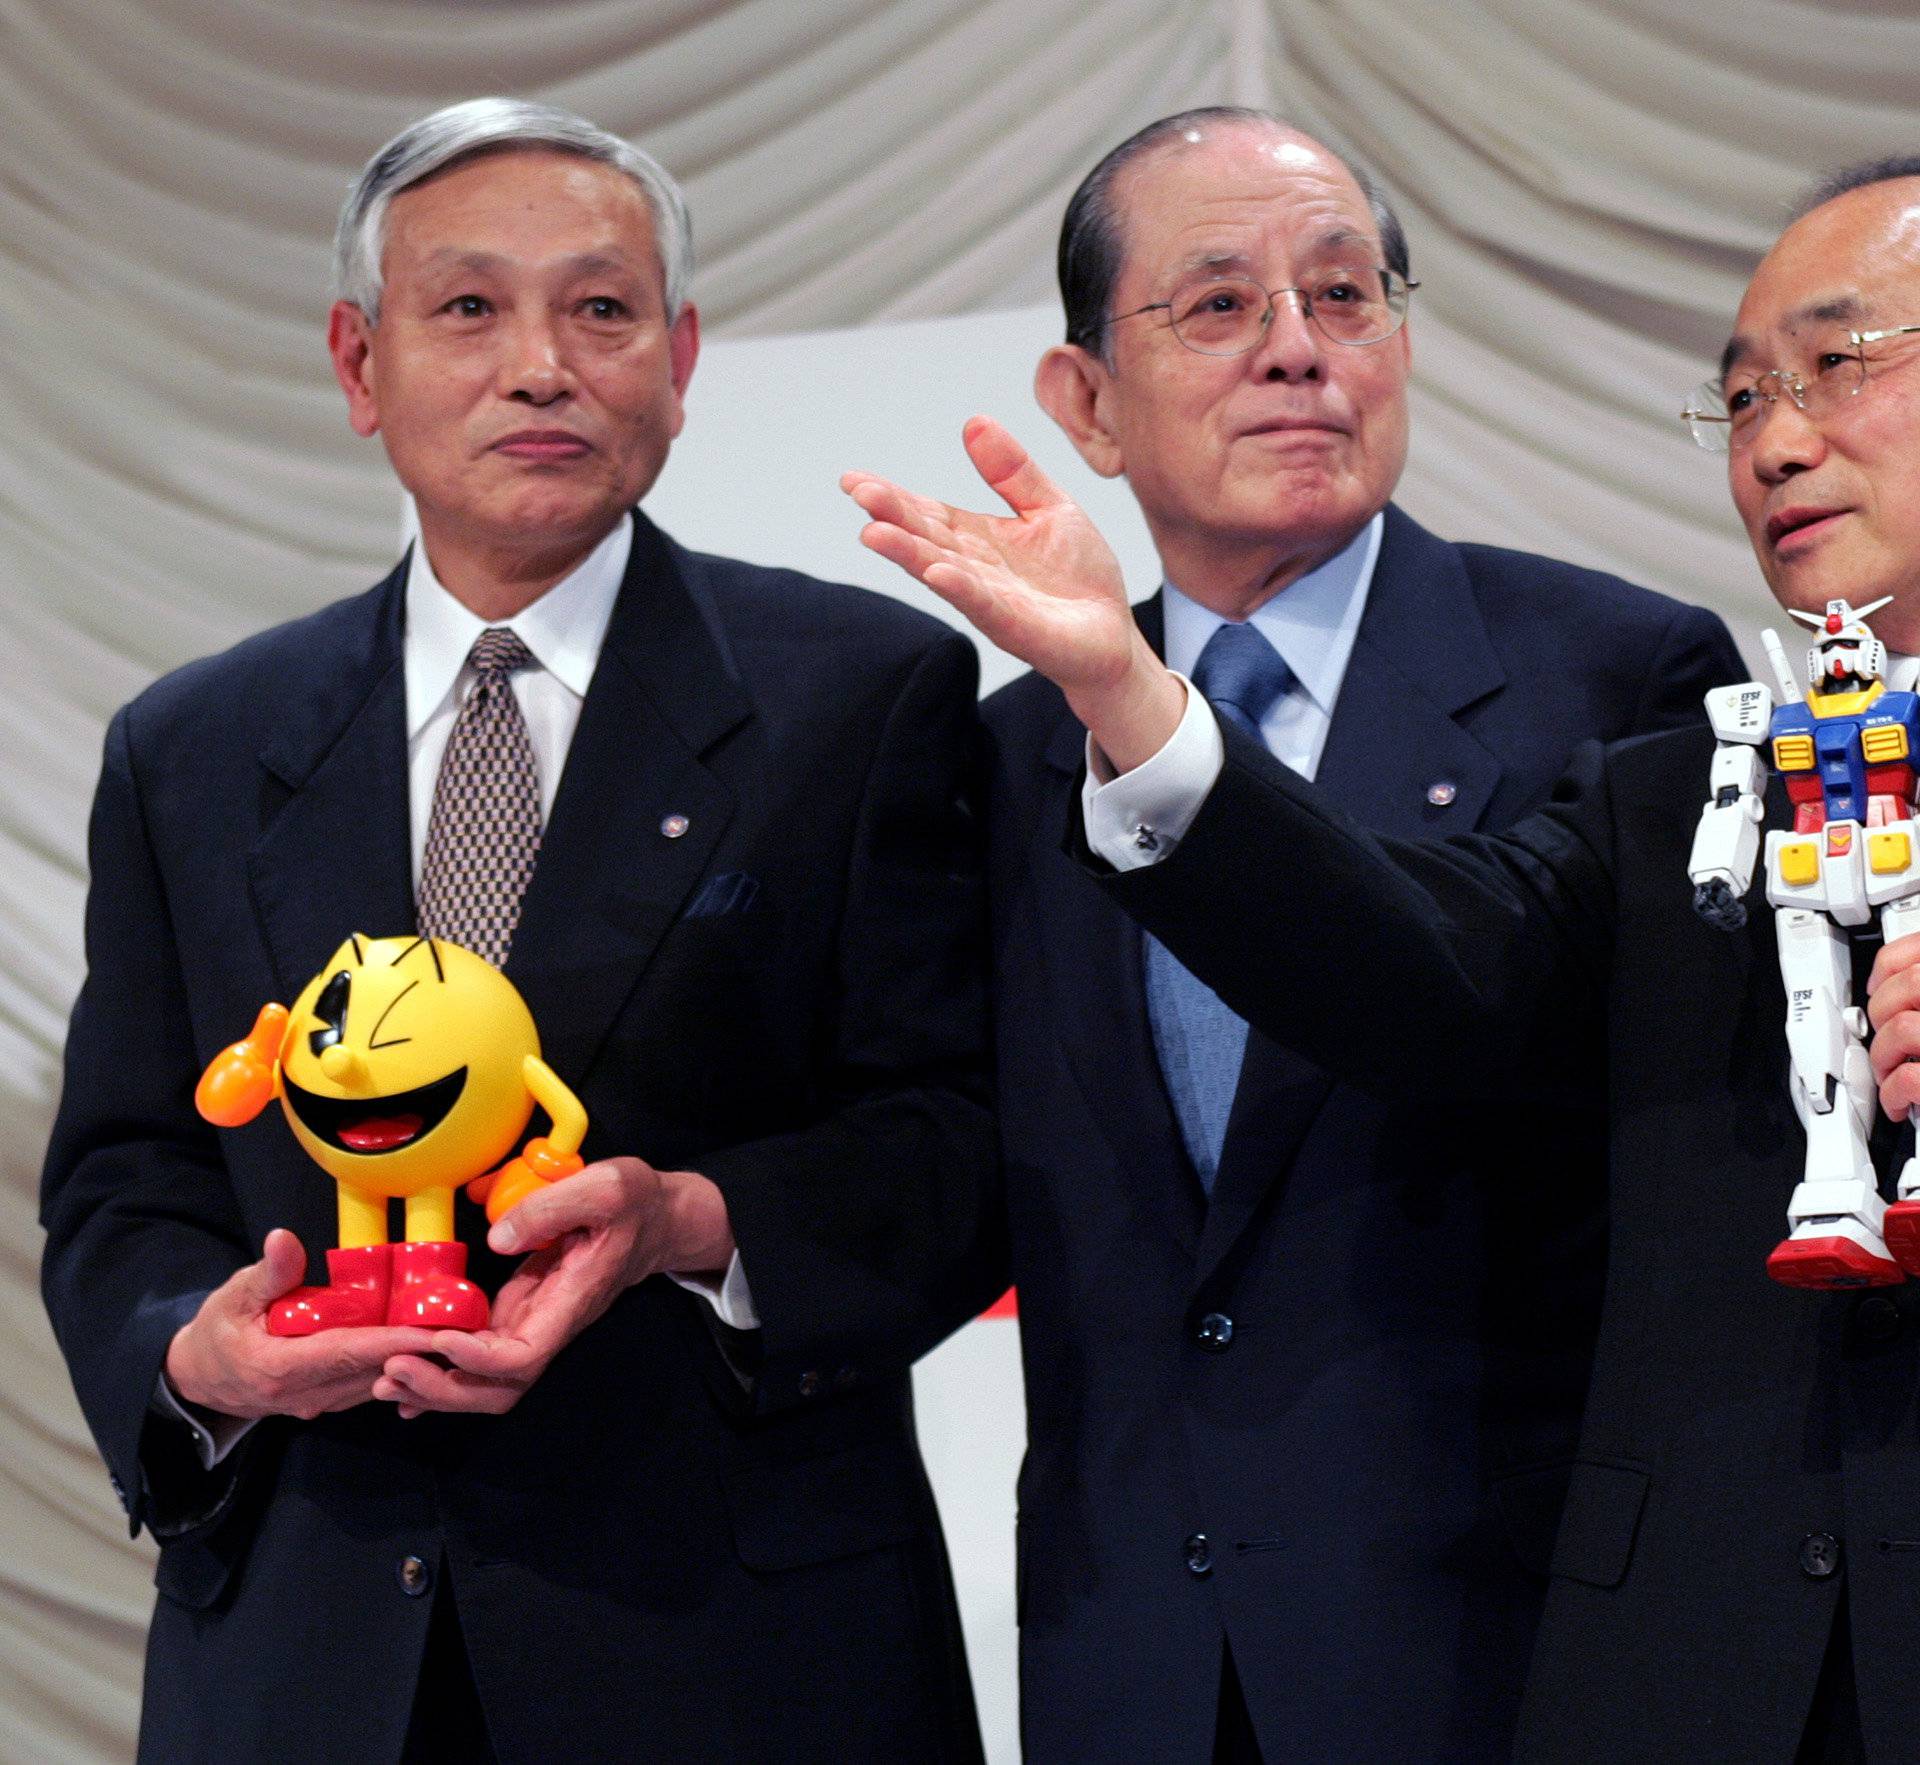 FILE PHOTO- Japanese toy maker Bandai Co President Takasu poses for photographers with Nakamura, chairman and founder of videogame company Namco Ltd, creator of "Pac-Man", and Vice-Chairman Takagi